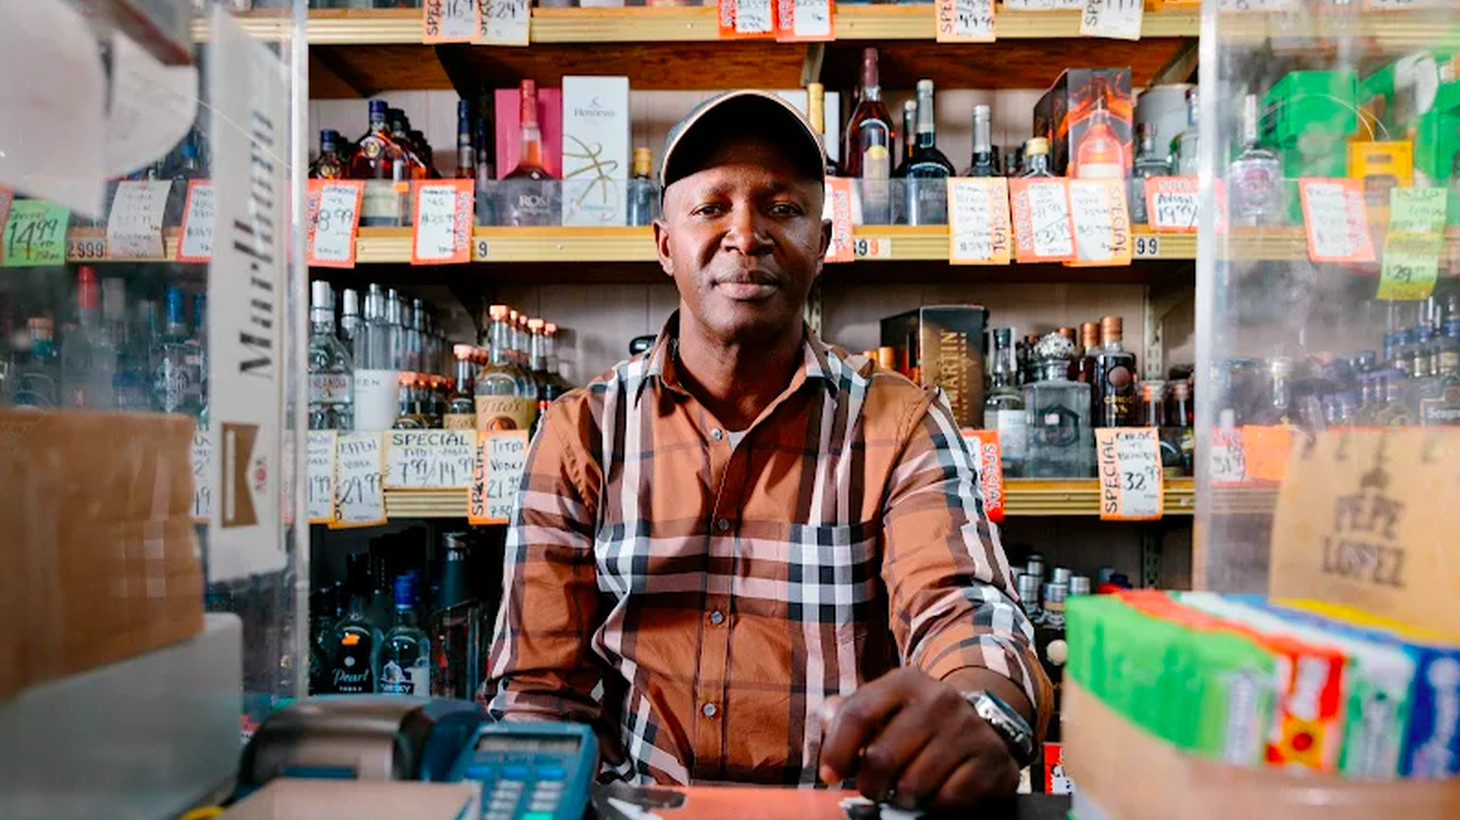 Abdul Jamal Sheriff owns Holiday Liquor on West Adams Boulevard. Holiday Liquor has been under an order from the city’s attorney office to mitigate gang activity around the store since 2020.